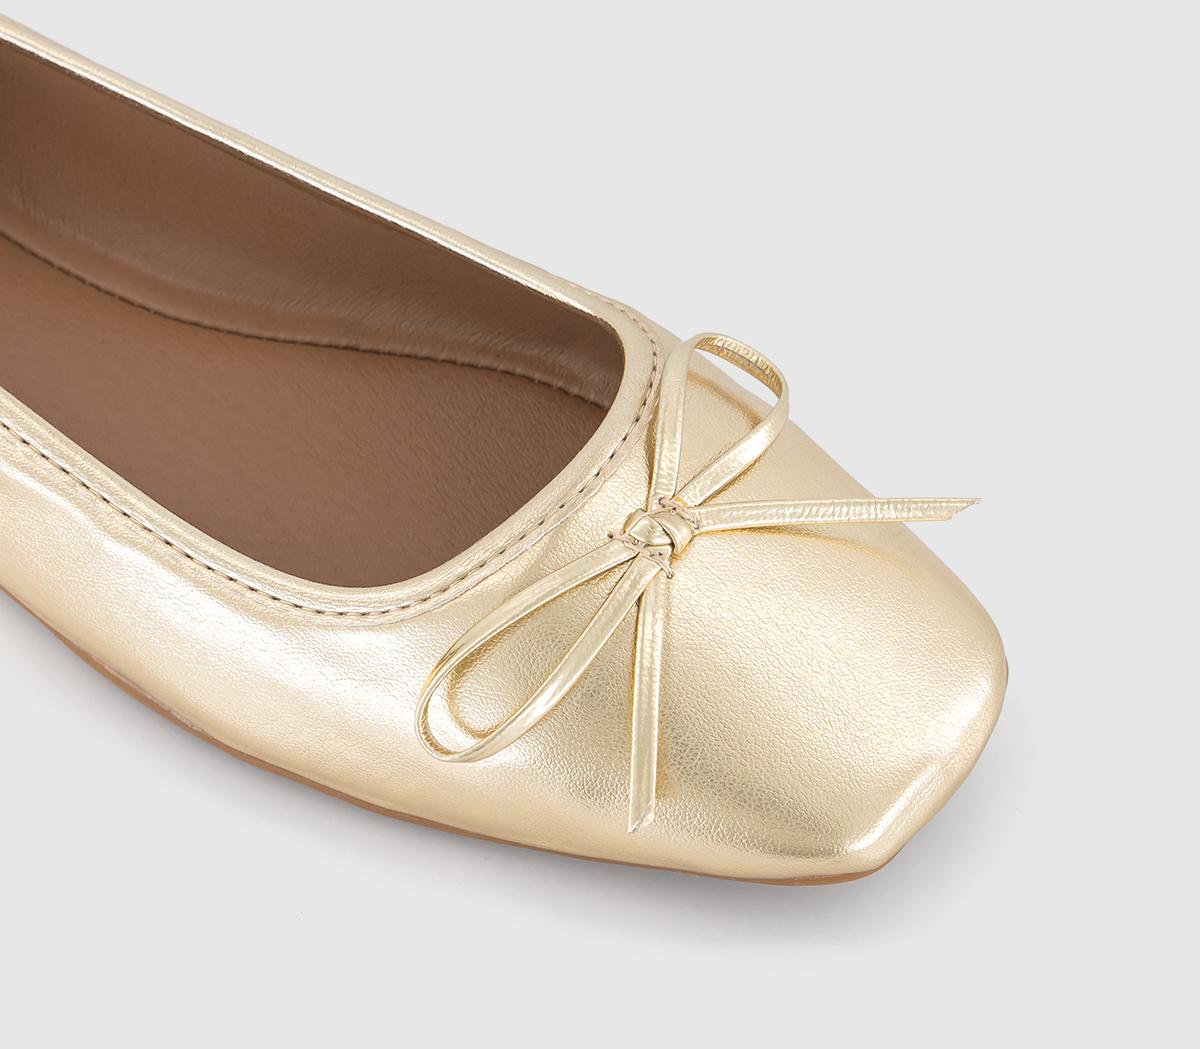 OFFICEFive Star Square Toe Ballerina Shoes Gold Metalic